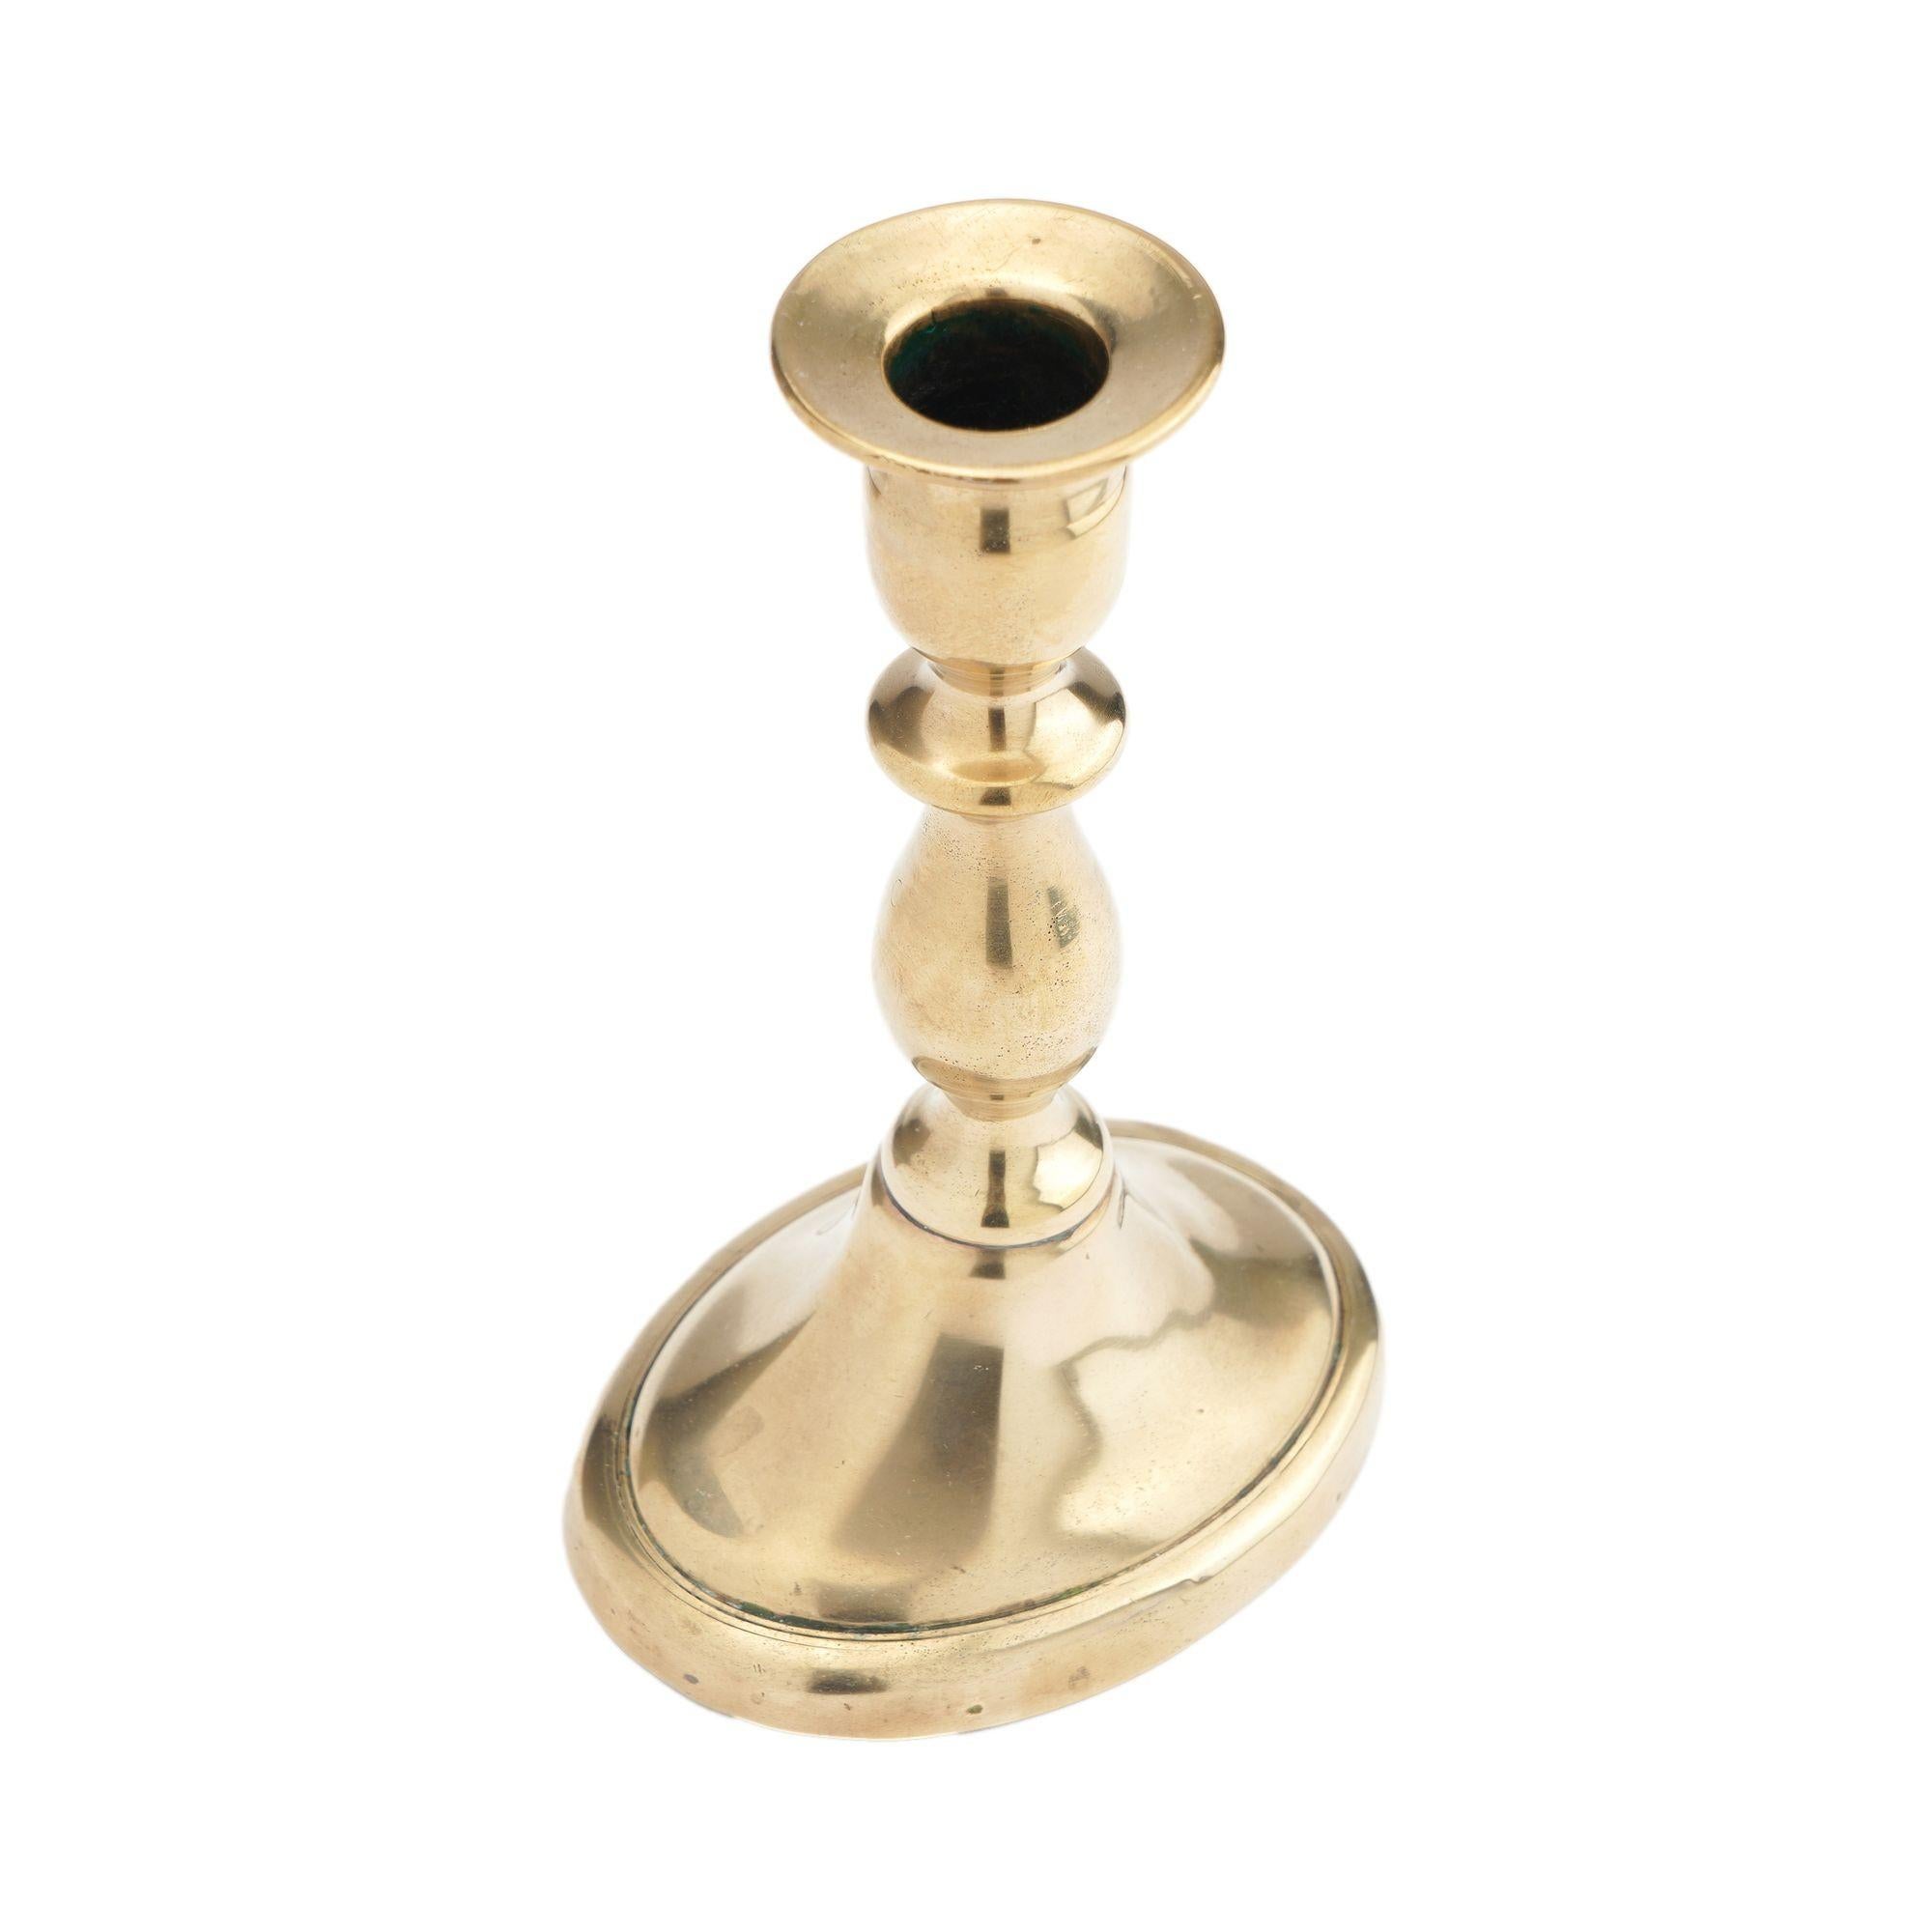 English cast brass oval base candlestick by William A. Harrison, 1791-1818 For Sale 4